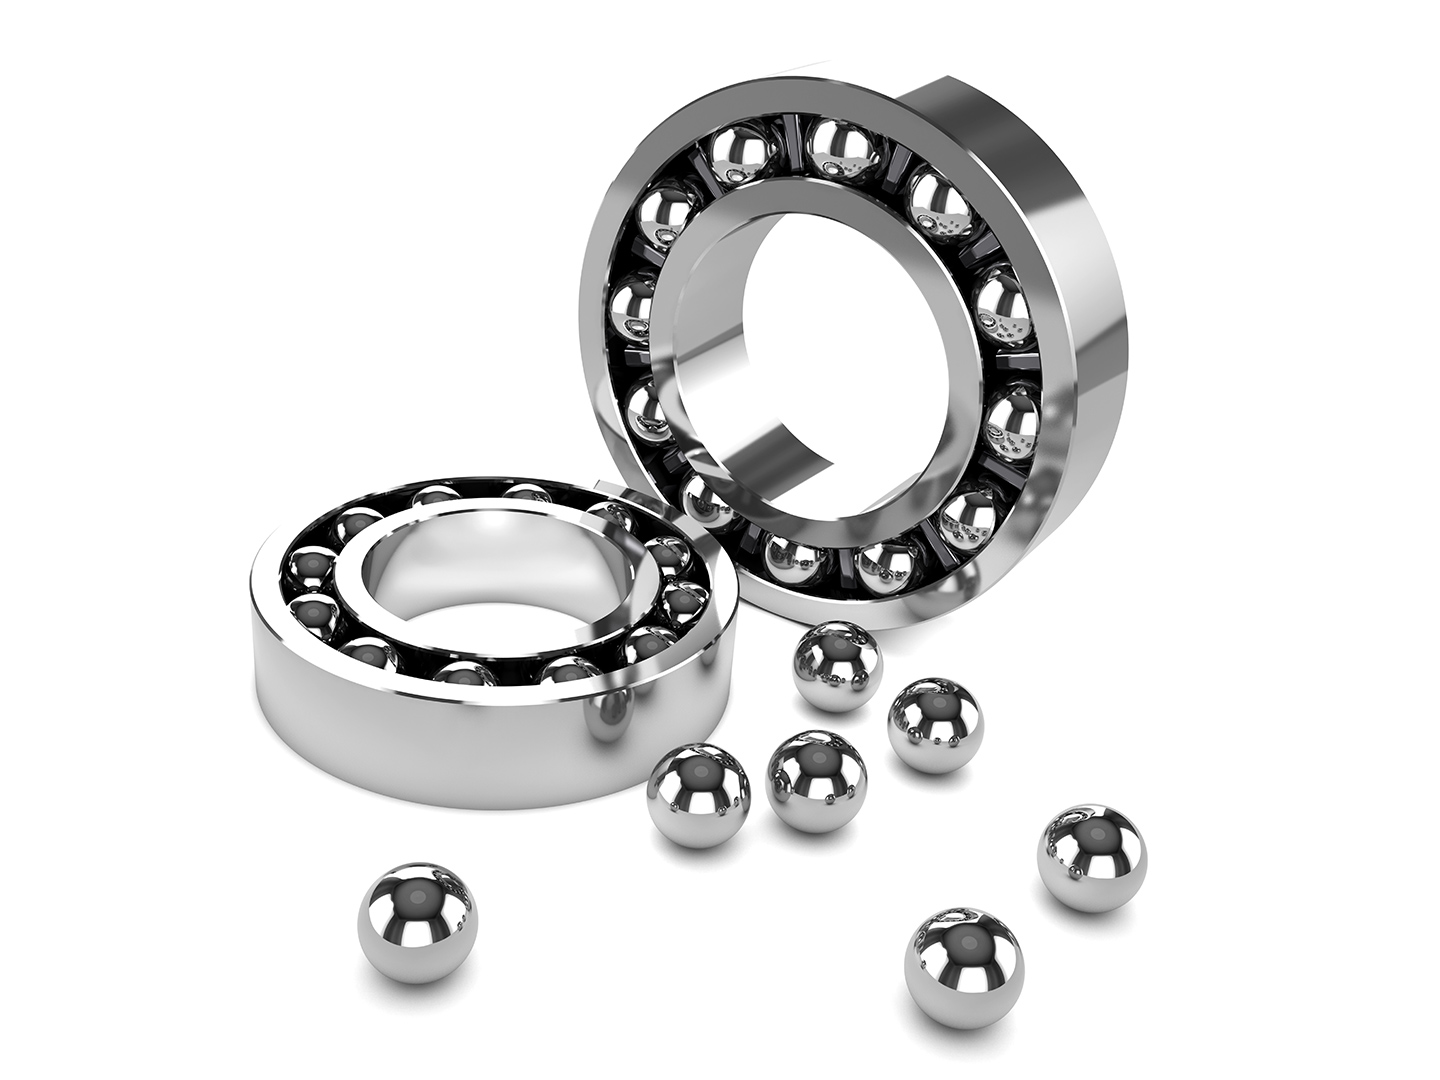 Greaseless ball bearings: A revolutionary spin on a design that's been  around for ages